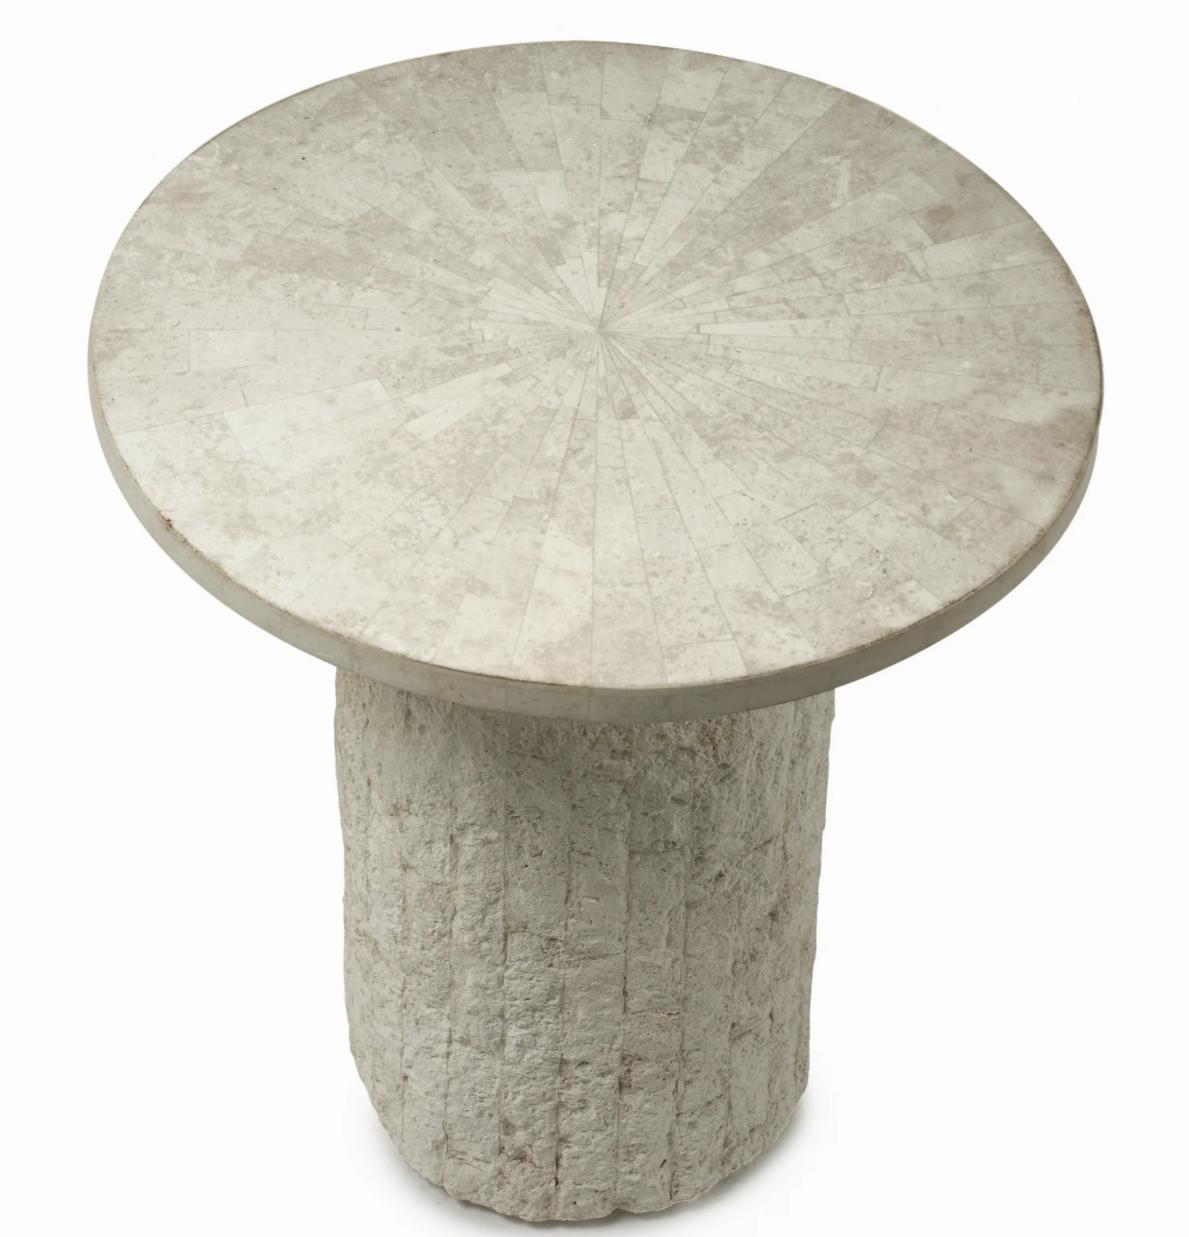 The ACADIA occasional table by OGGETTI is made of fossilized stone featuring a carved base and dial top that embraces the natural textures of the stone.

SIZES AND DIMENSIONS:

Large:   20″Dia. x 22.5″H   Wt: 60-lbs

Small:   16